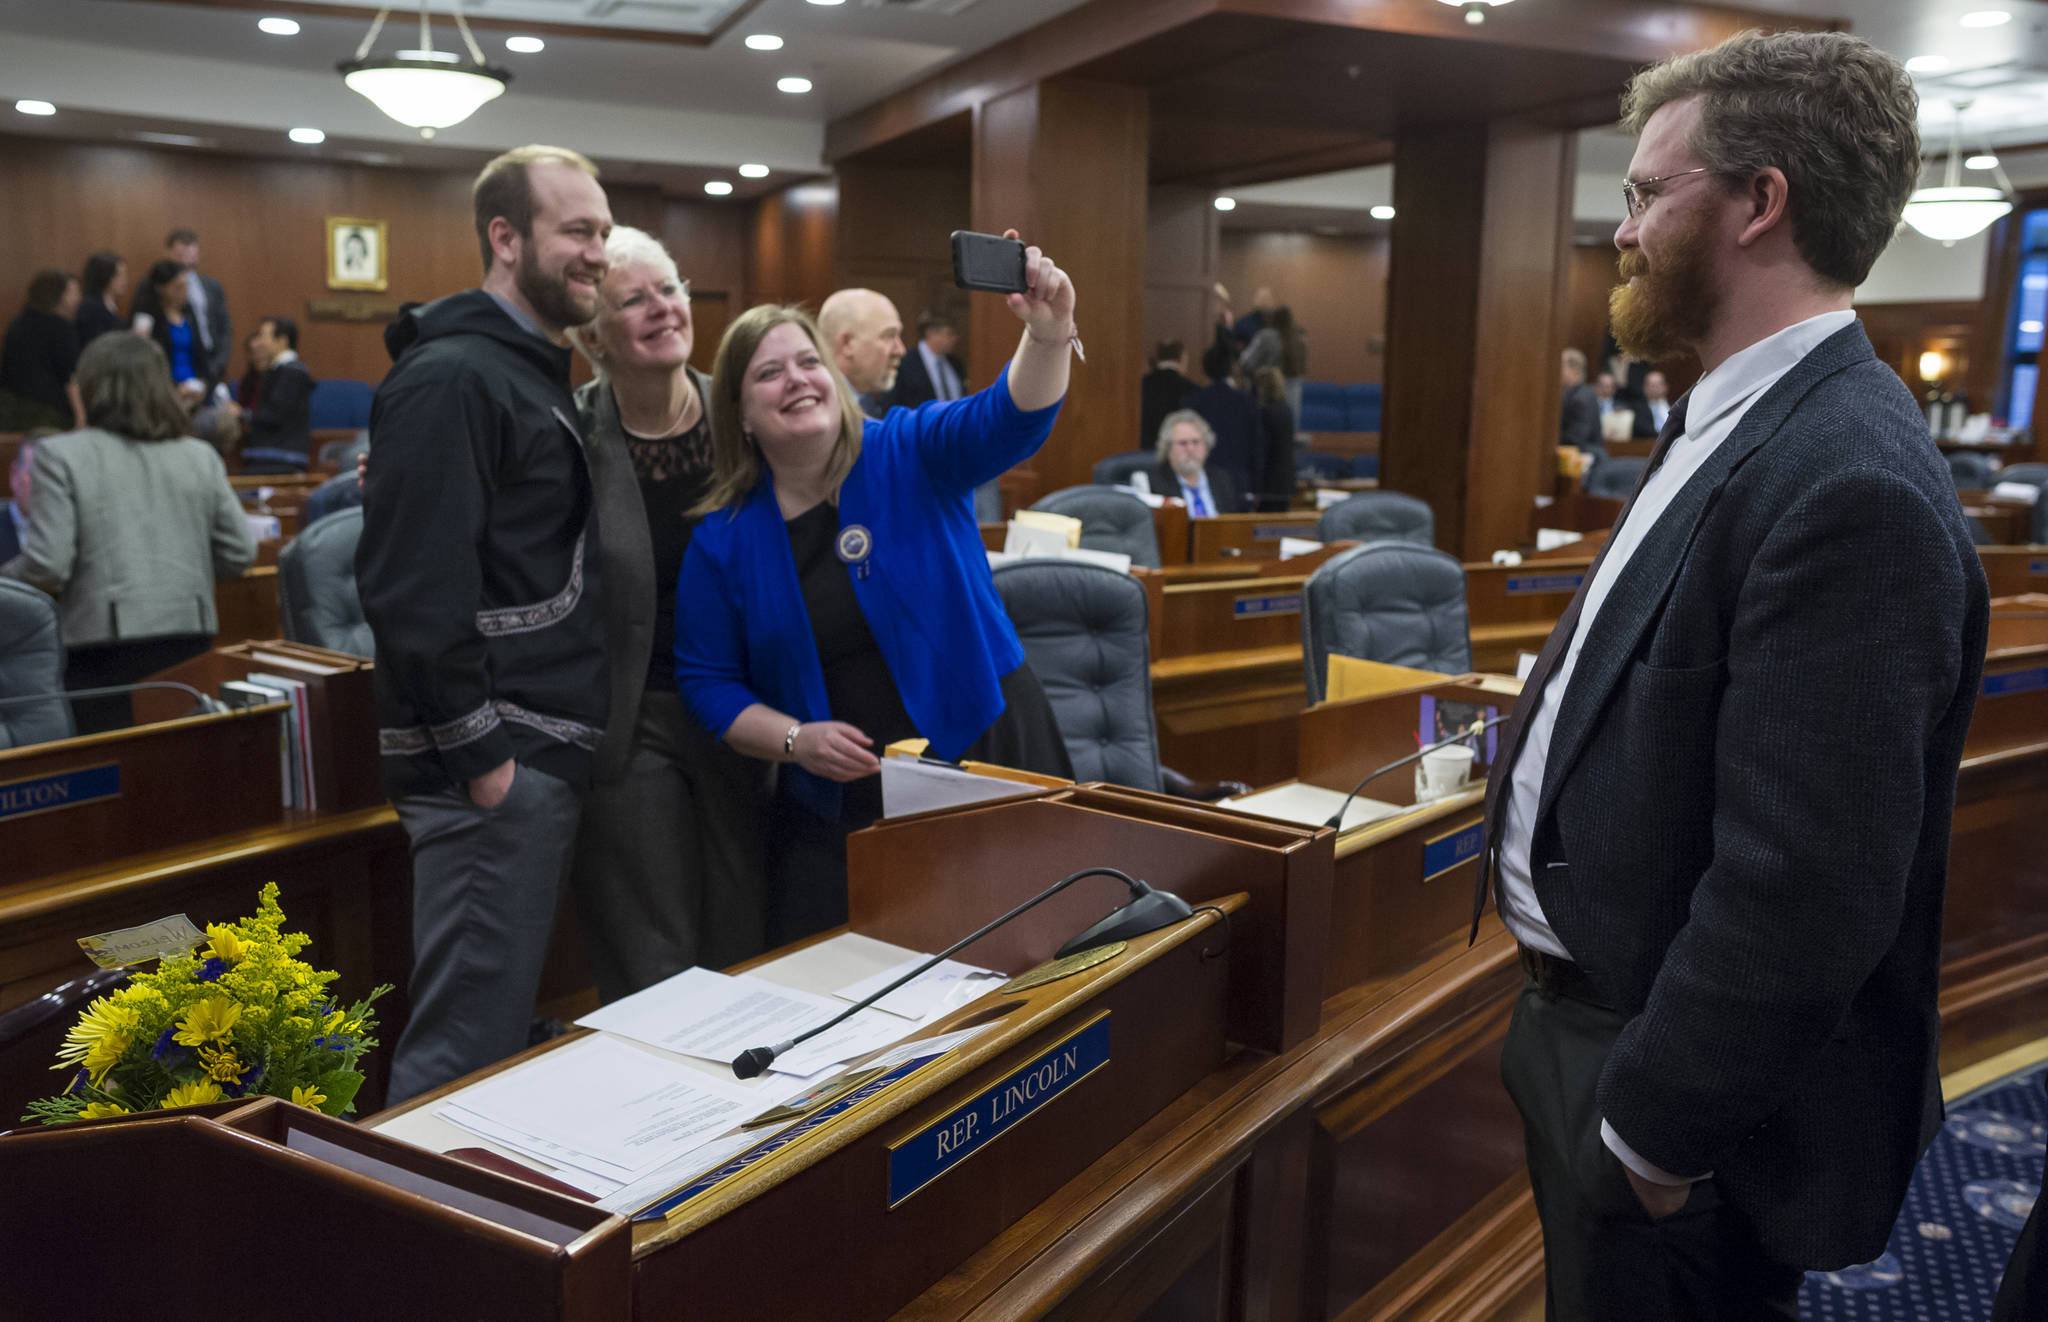 Rep. John Lincoln, D-Kotzebue, left, has his picture taken with Rep. Louise Stutes, R-Kodiak, by Rep. Geran Tarr, D-Anchorage, as Rep. Justin Parish, D-Juneau, watches in the House chambers on Wednesday, Jan. 31, 2018. (Michael Penn | Juneau Empire)